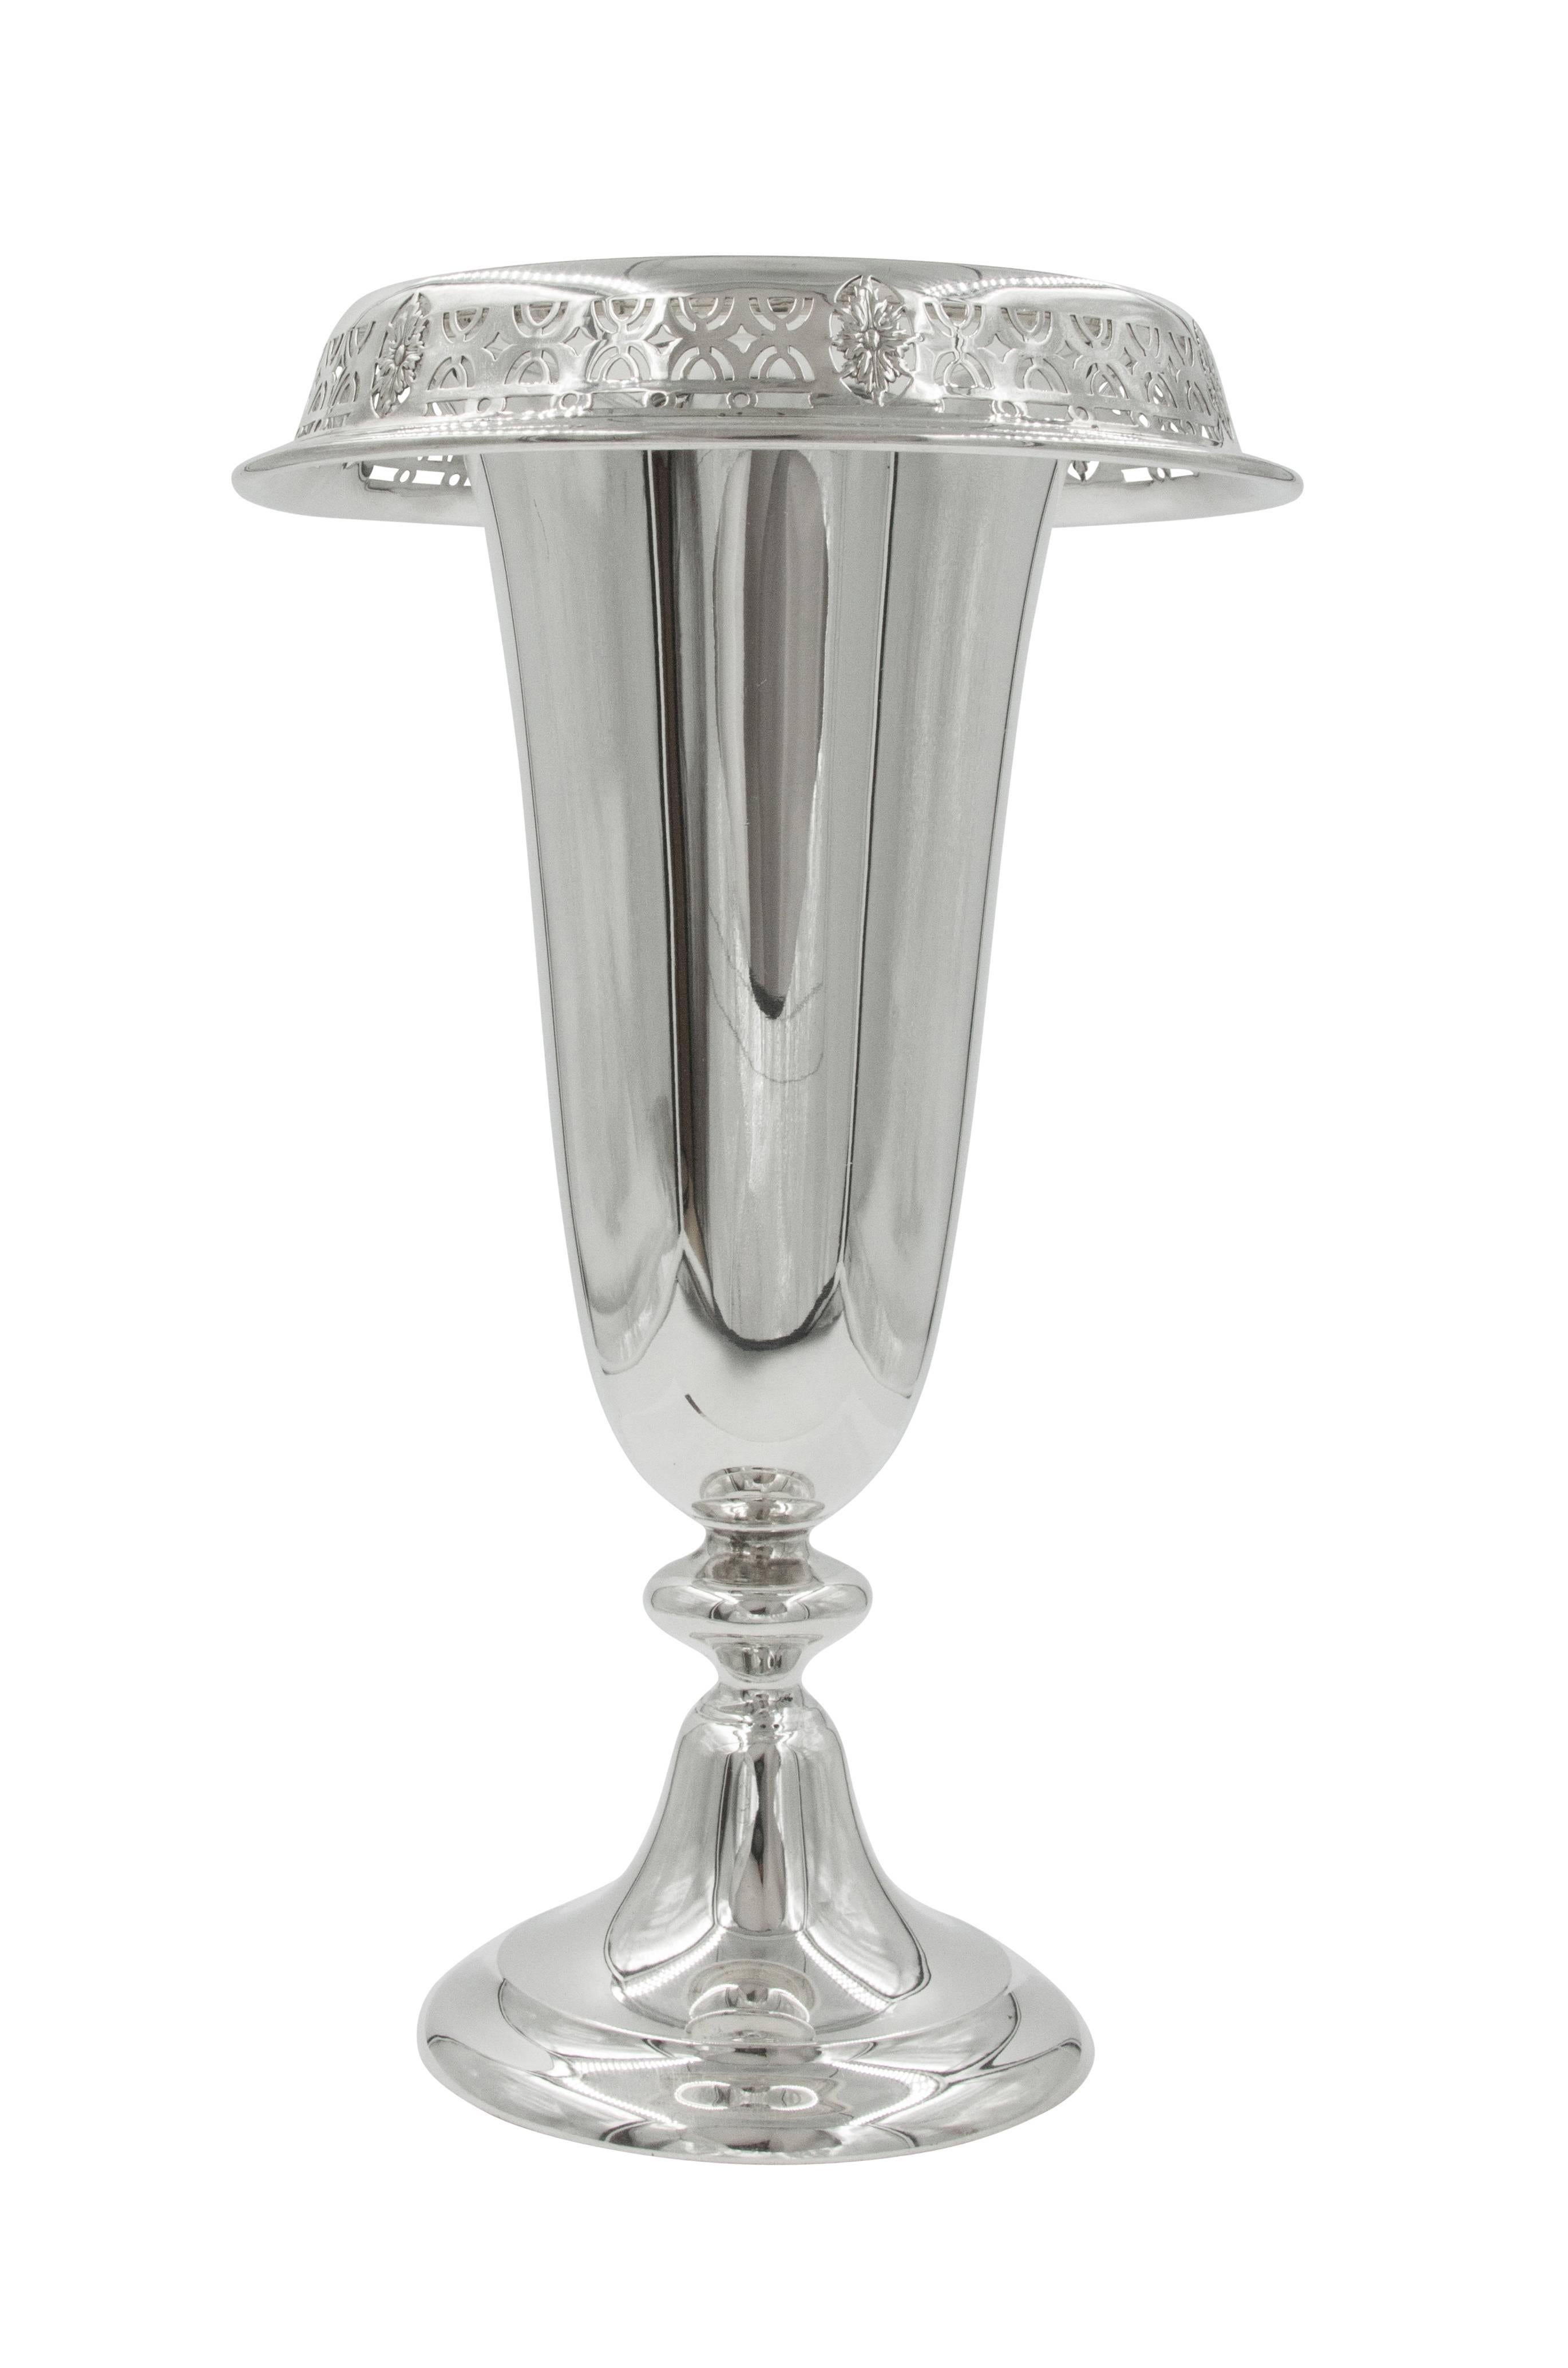 We are proud to offer this pair of vases that have an urn-like shape and a wide rim. The rim folds over and has a lovely symmetrical cutout design that adds a soft decorative feel to this otherwise simple piece. There are six leaf-like medallions